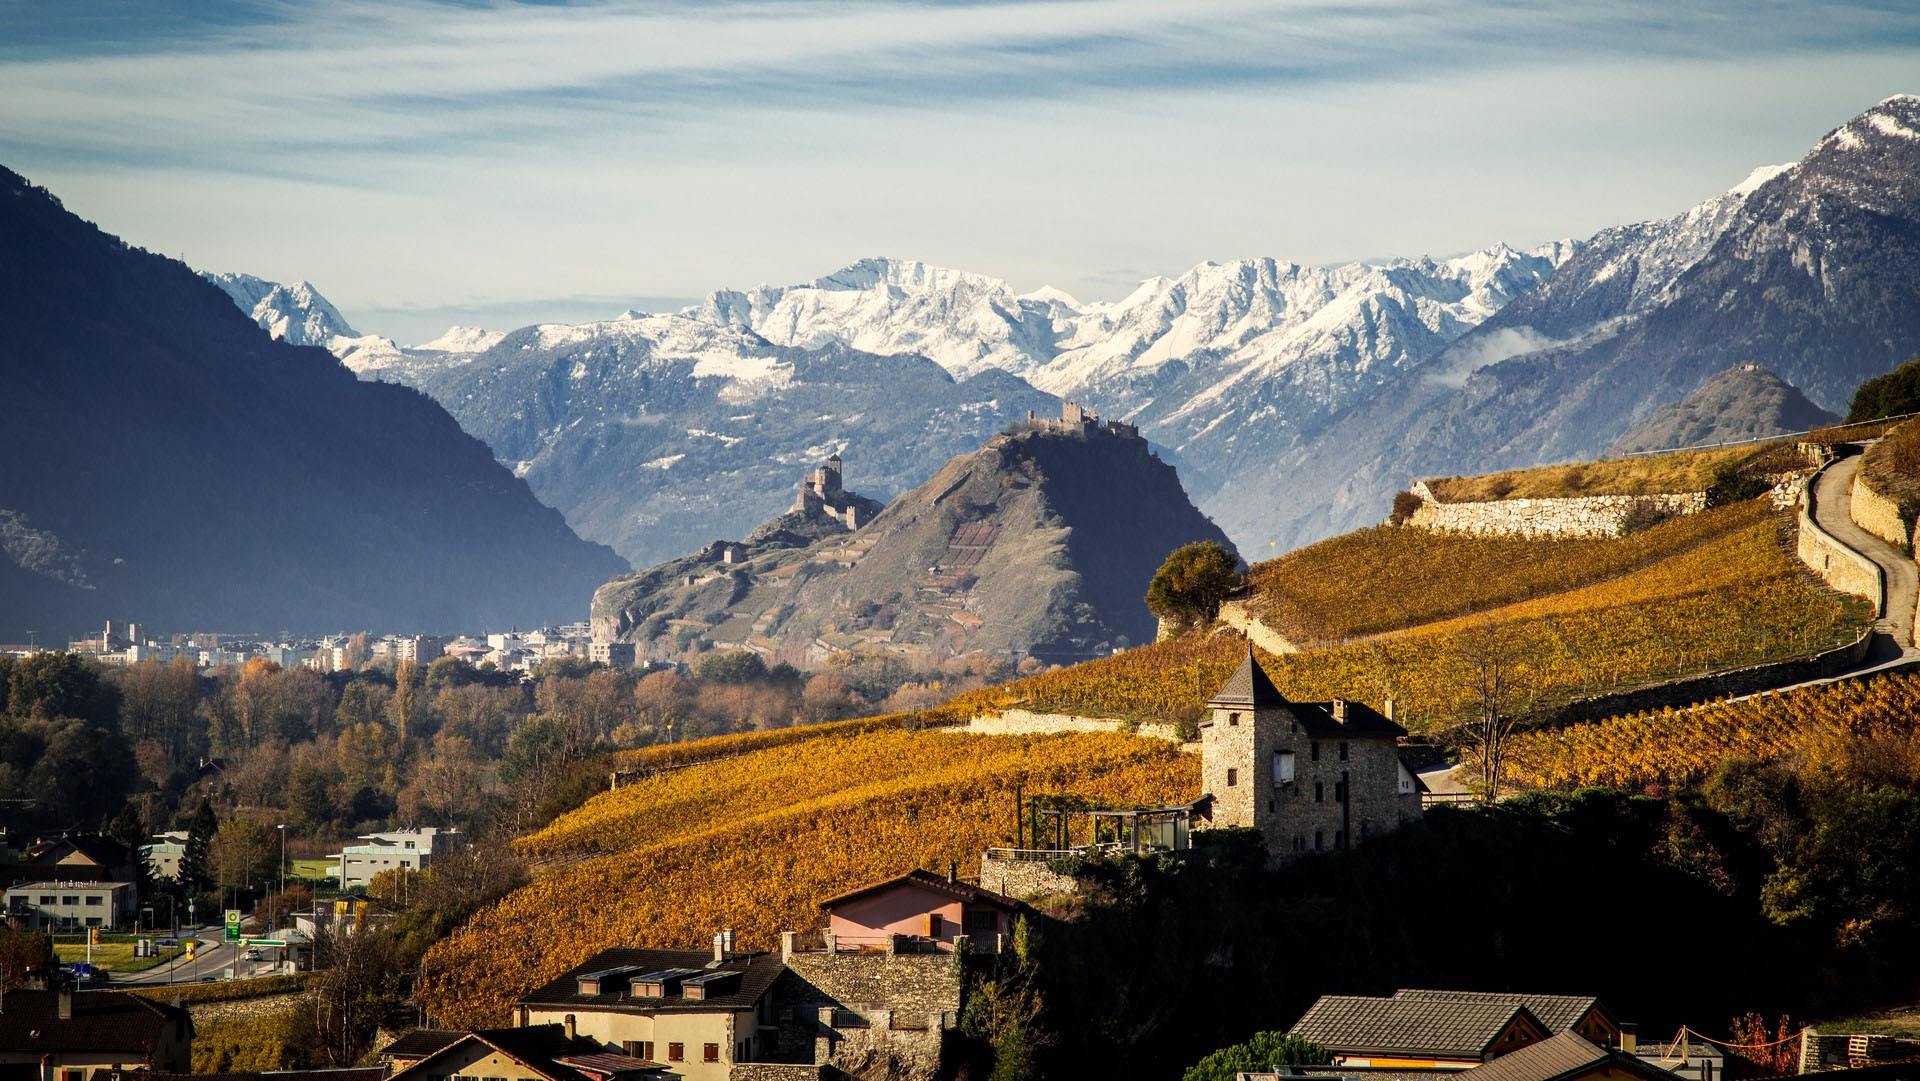 The Chalet d'Adrien and the wines of the Valais